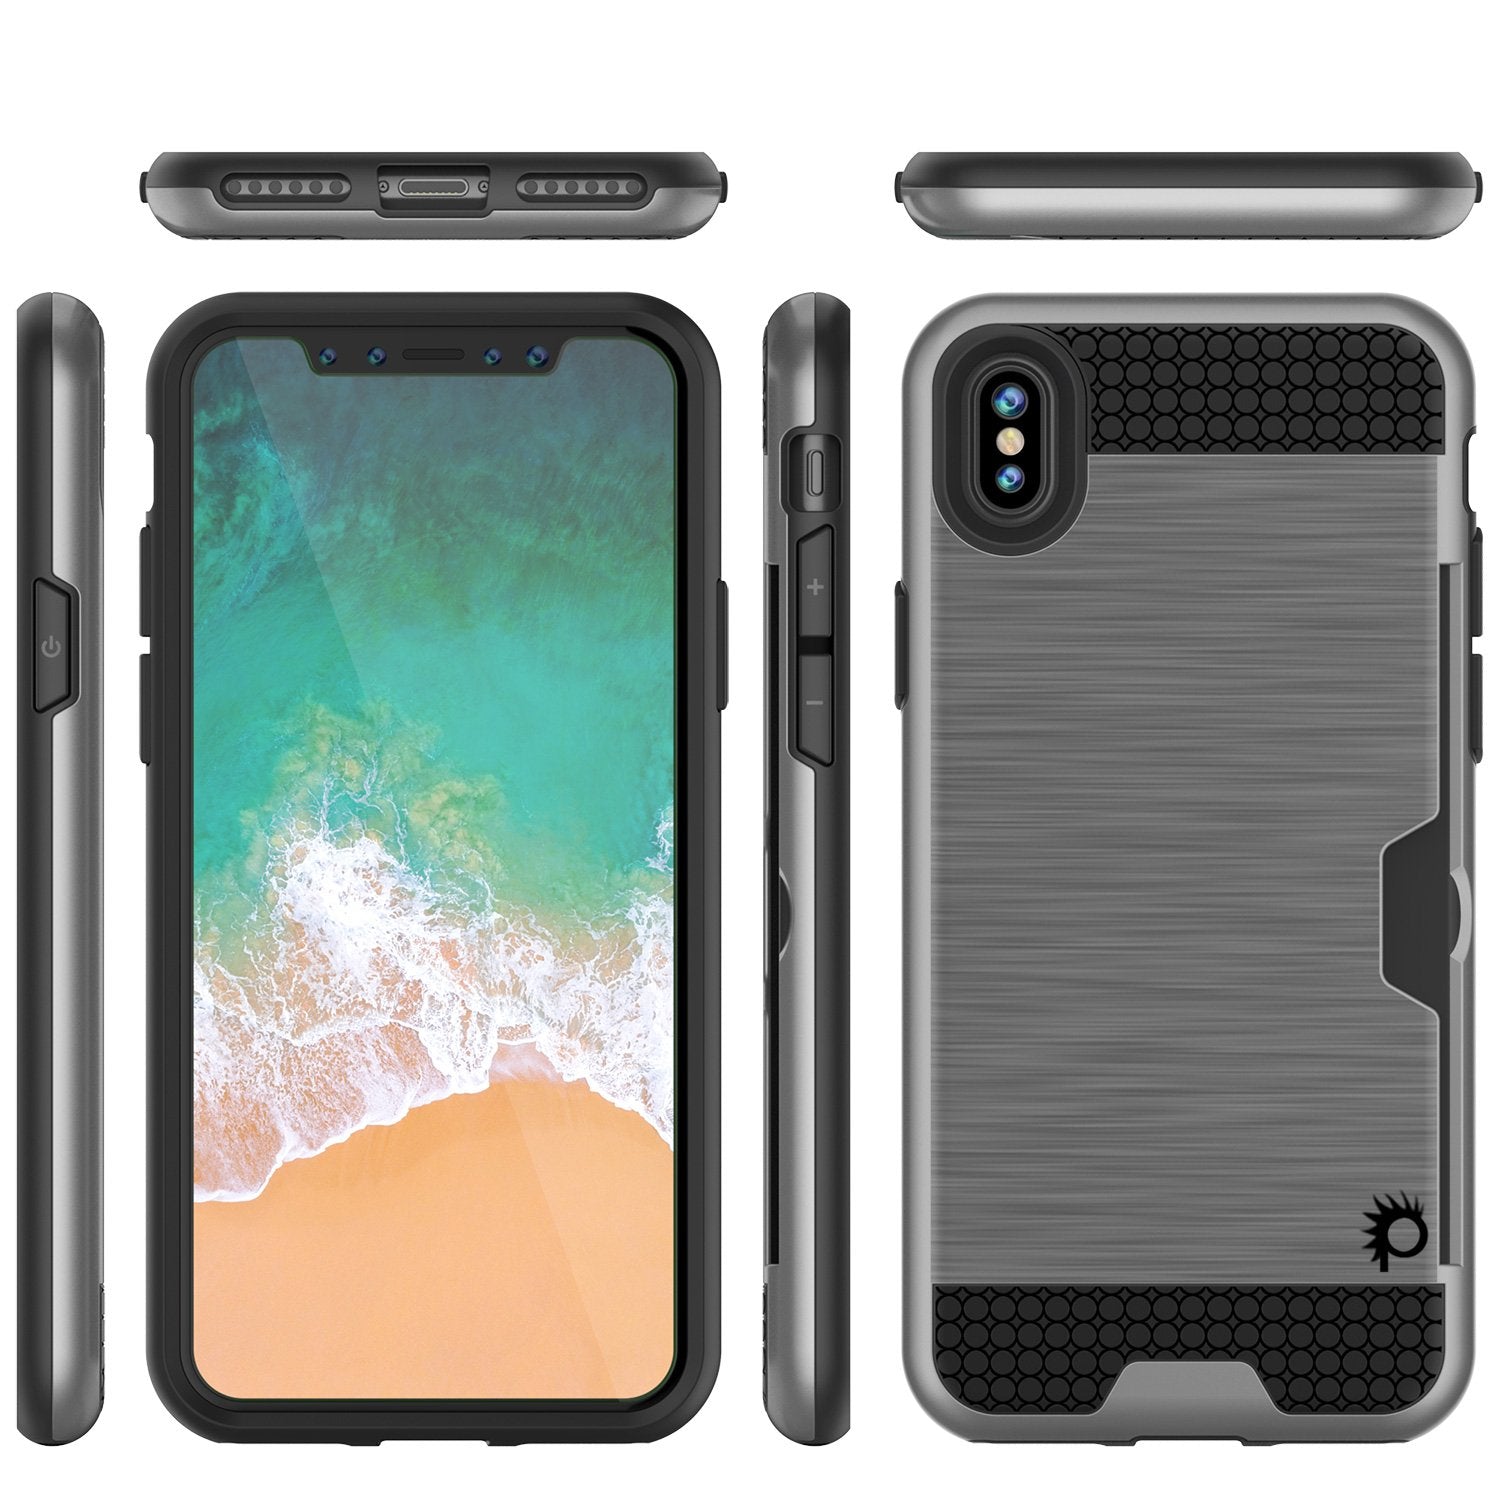 iPhone X Case, PUNKcase [SLOT Series] Slim Fit Dual-Layer Armor Cover [Silver]